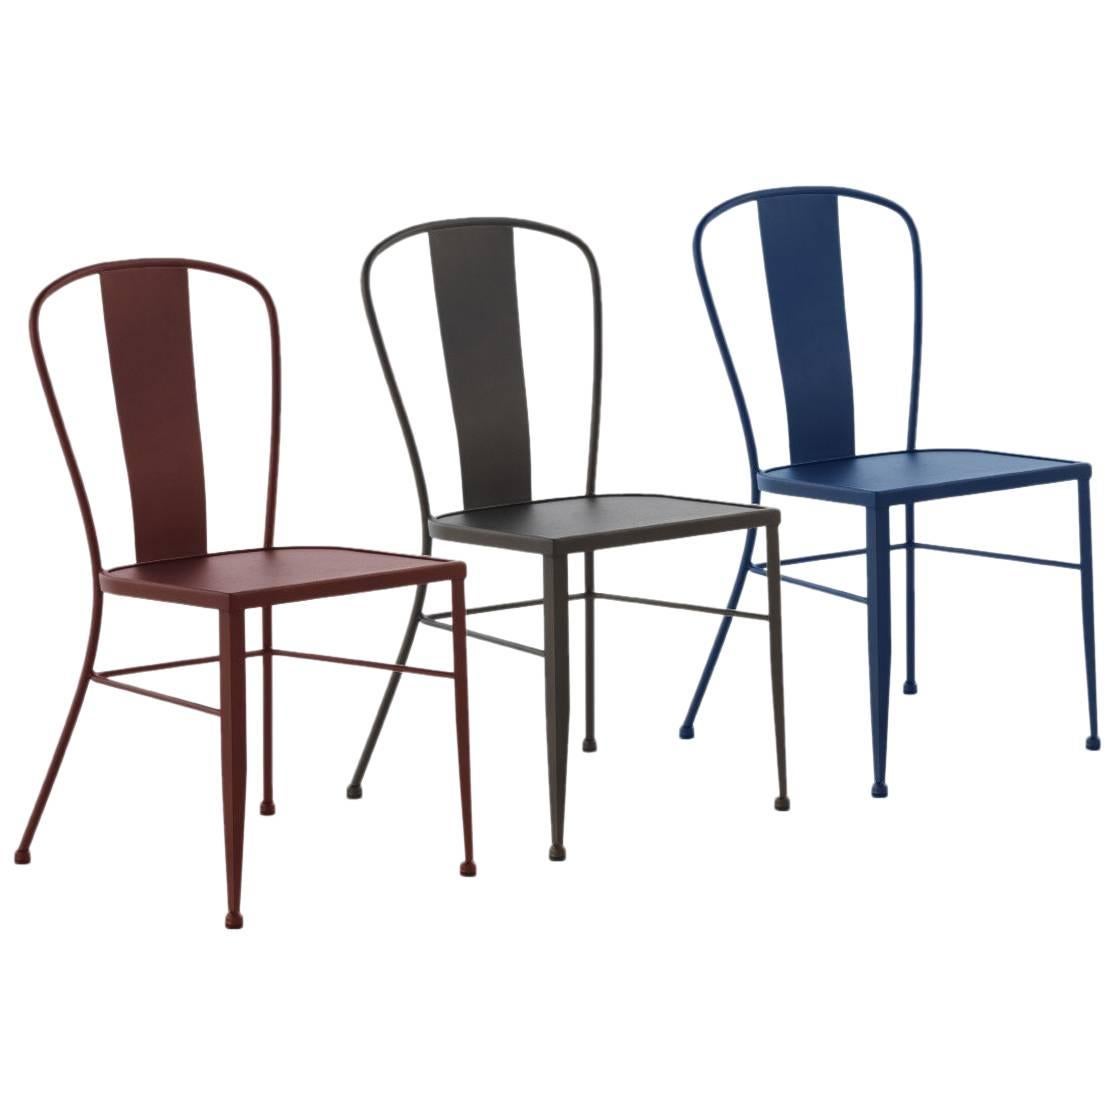 Bistro garden chairs in colors wrought iron with wood seat.

Indoor and outdoor.